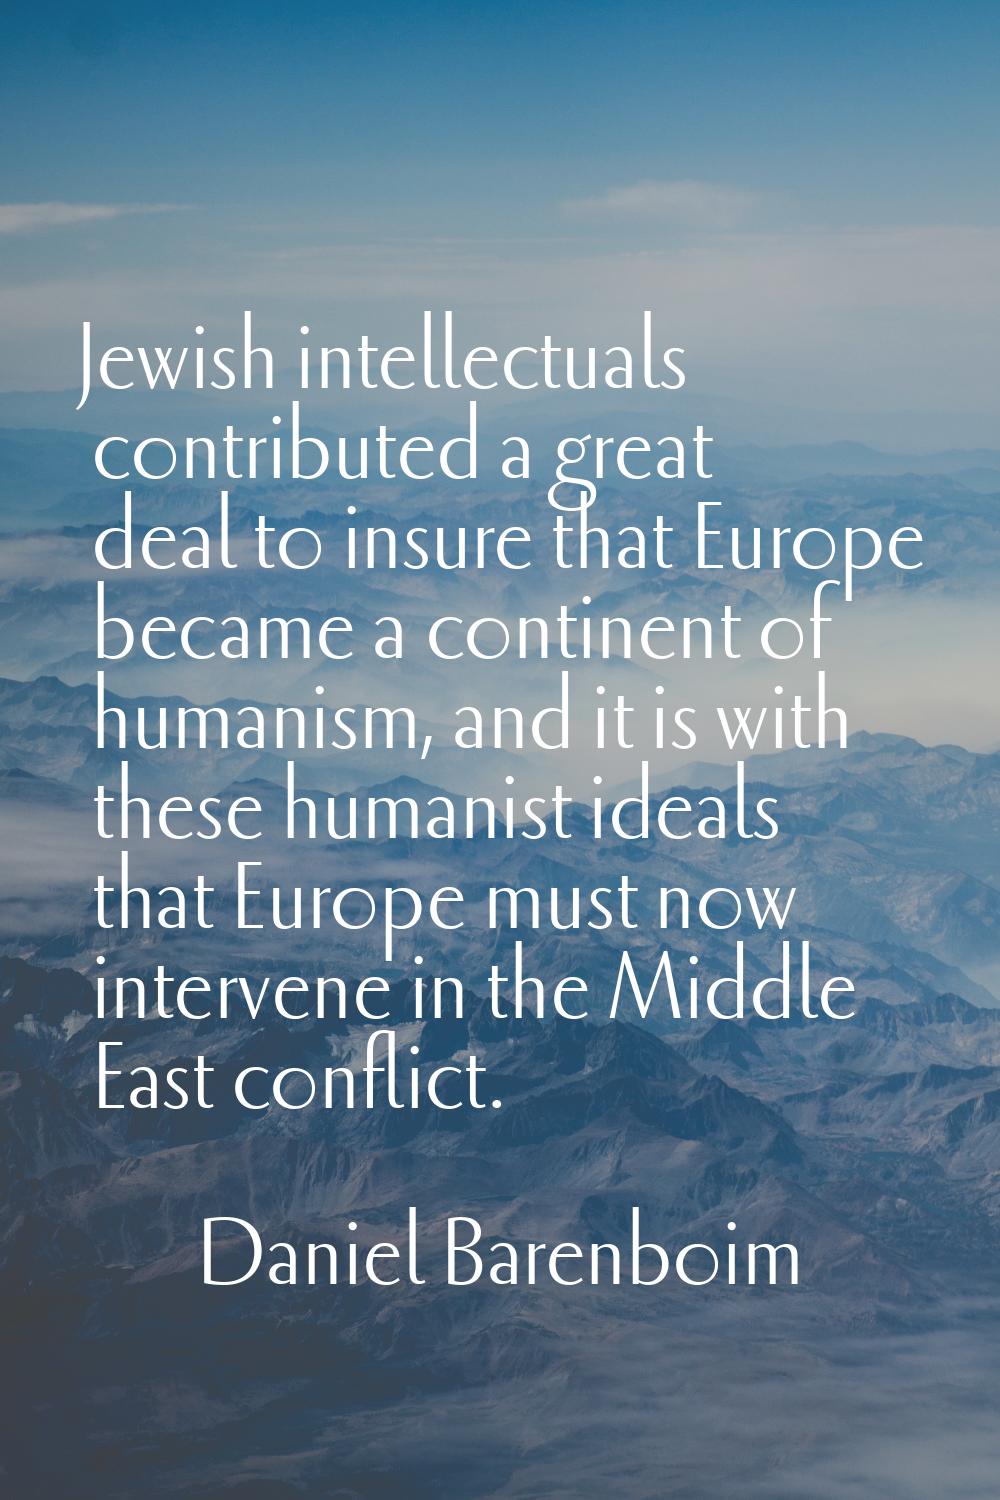 Jewish intellectuals contributed a great deal to insure that Europe became a continent of humanism,